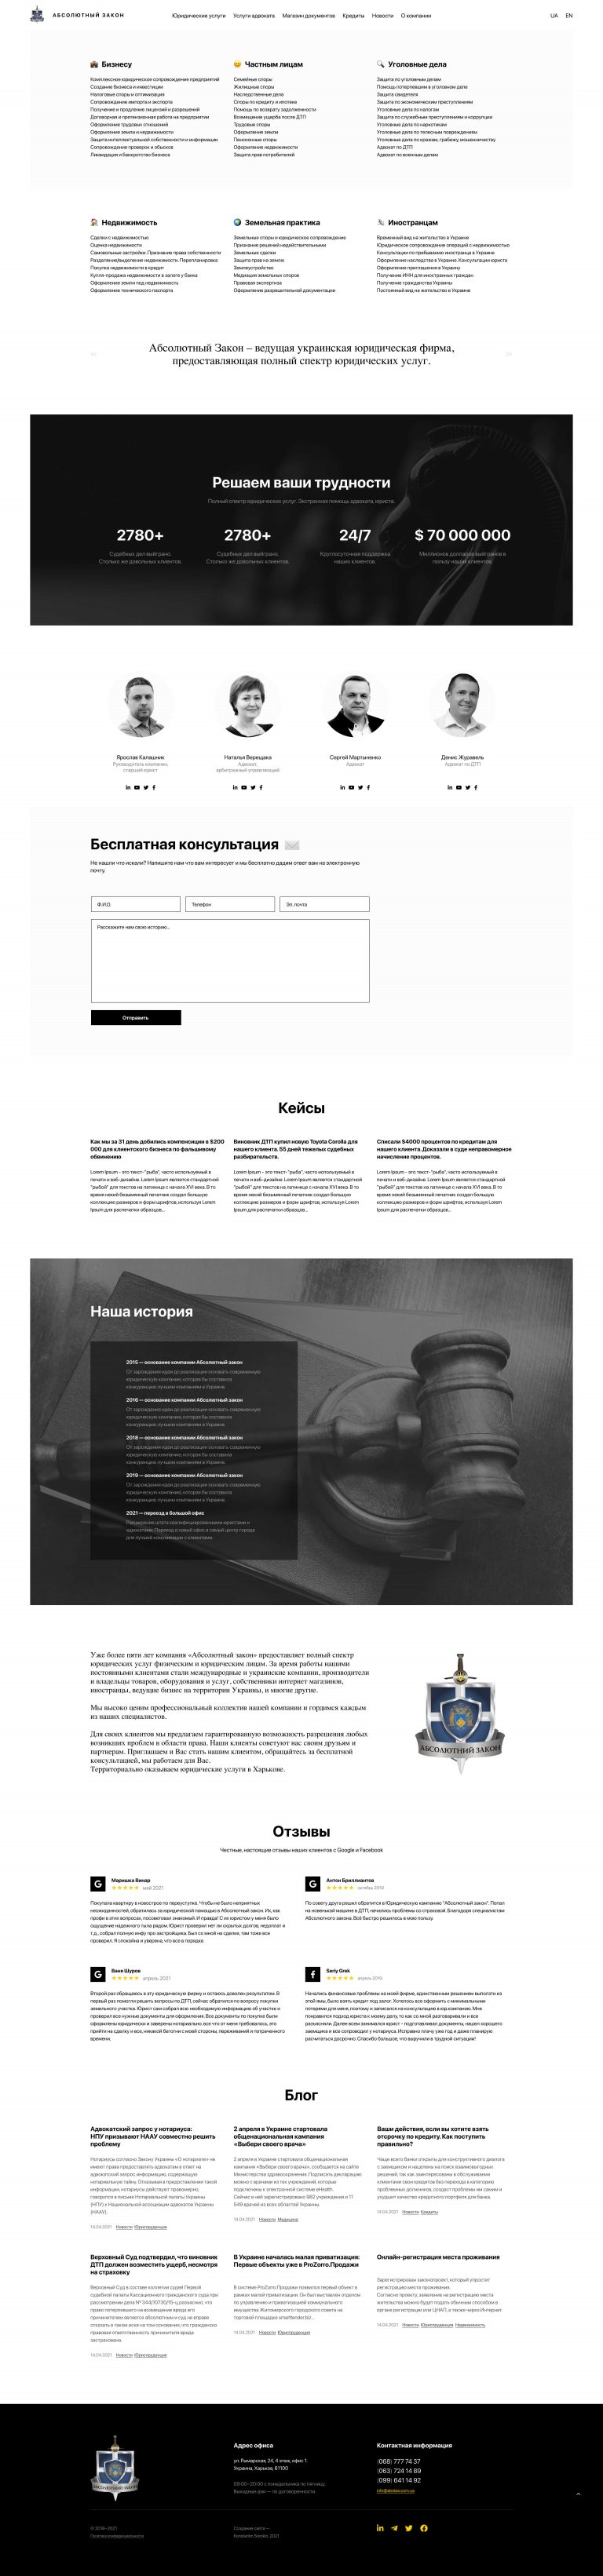 Website of the legal company "Absolute Law"